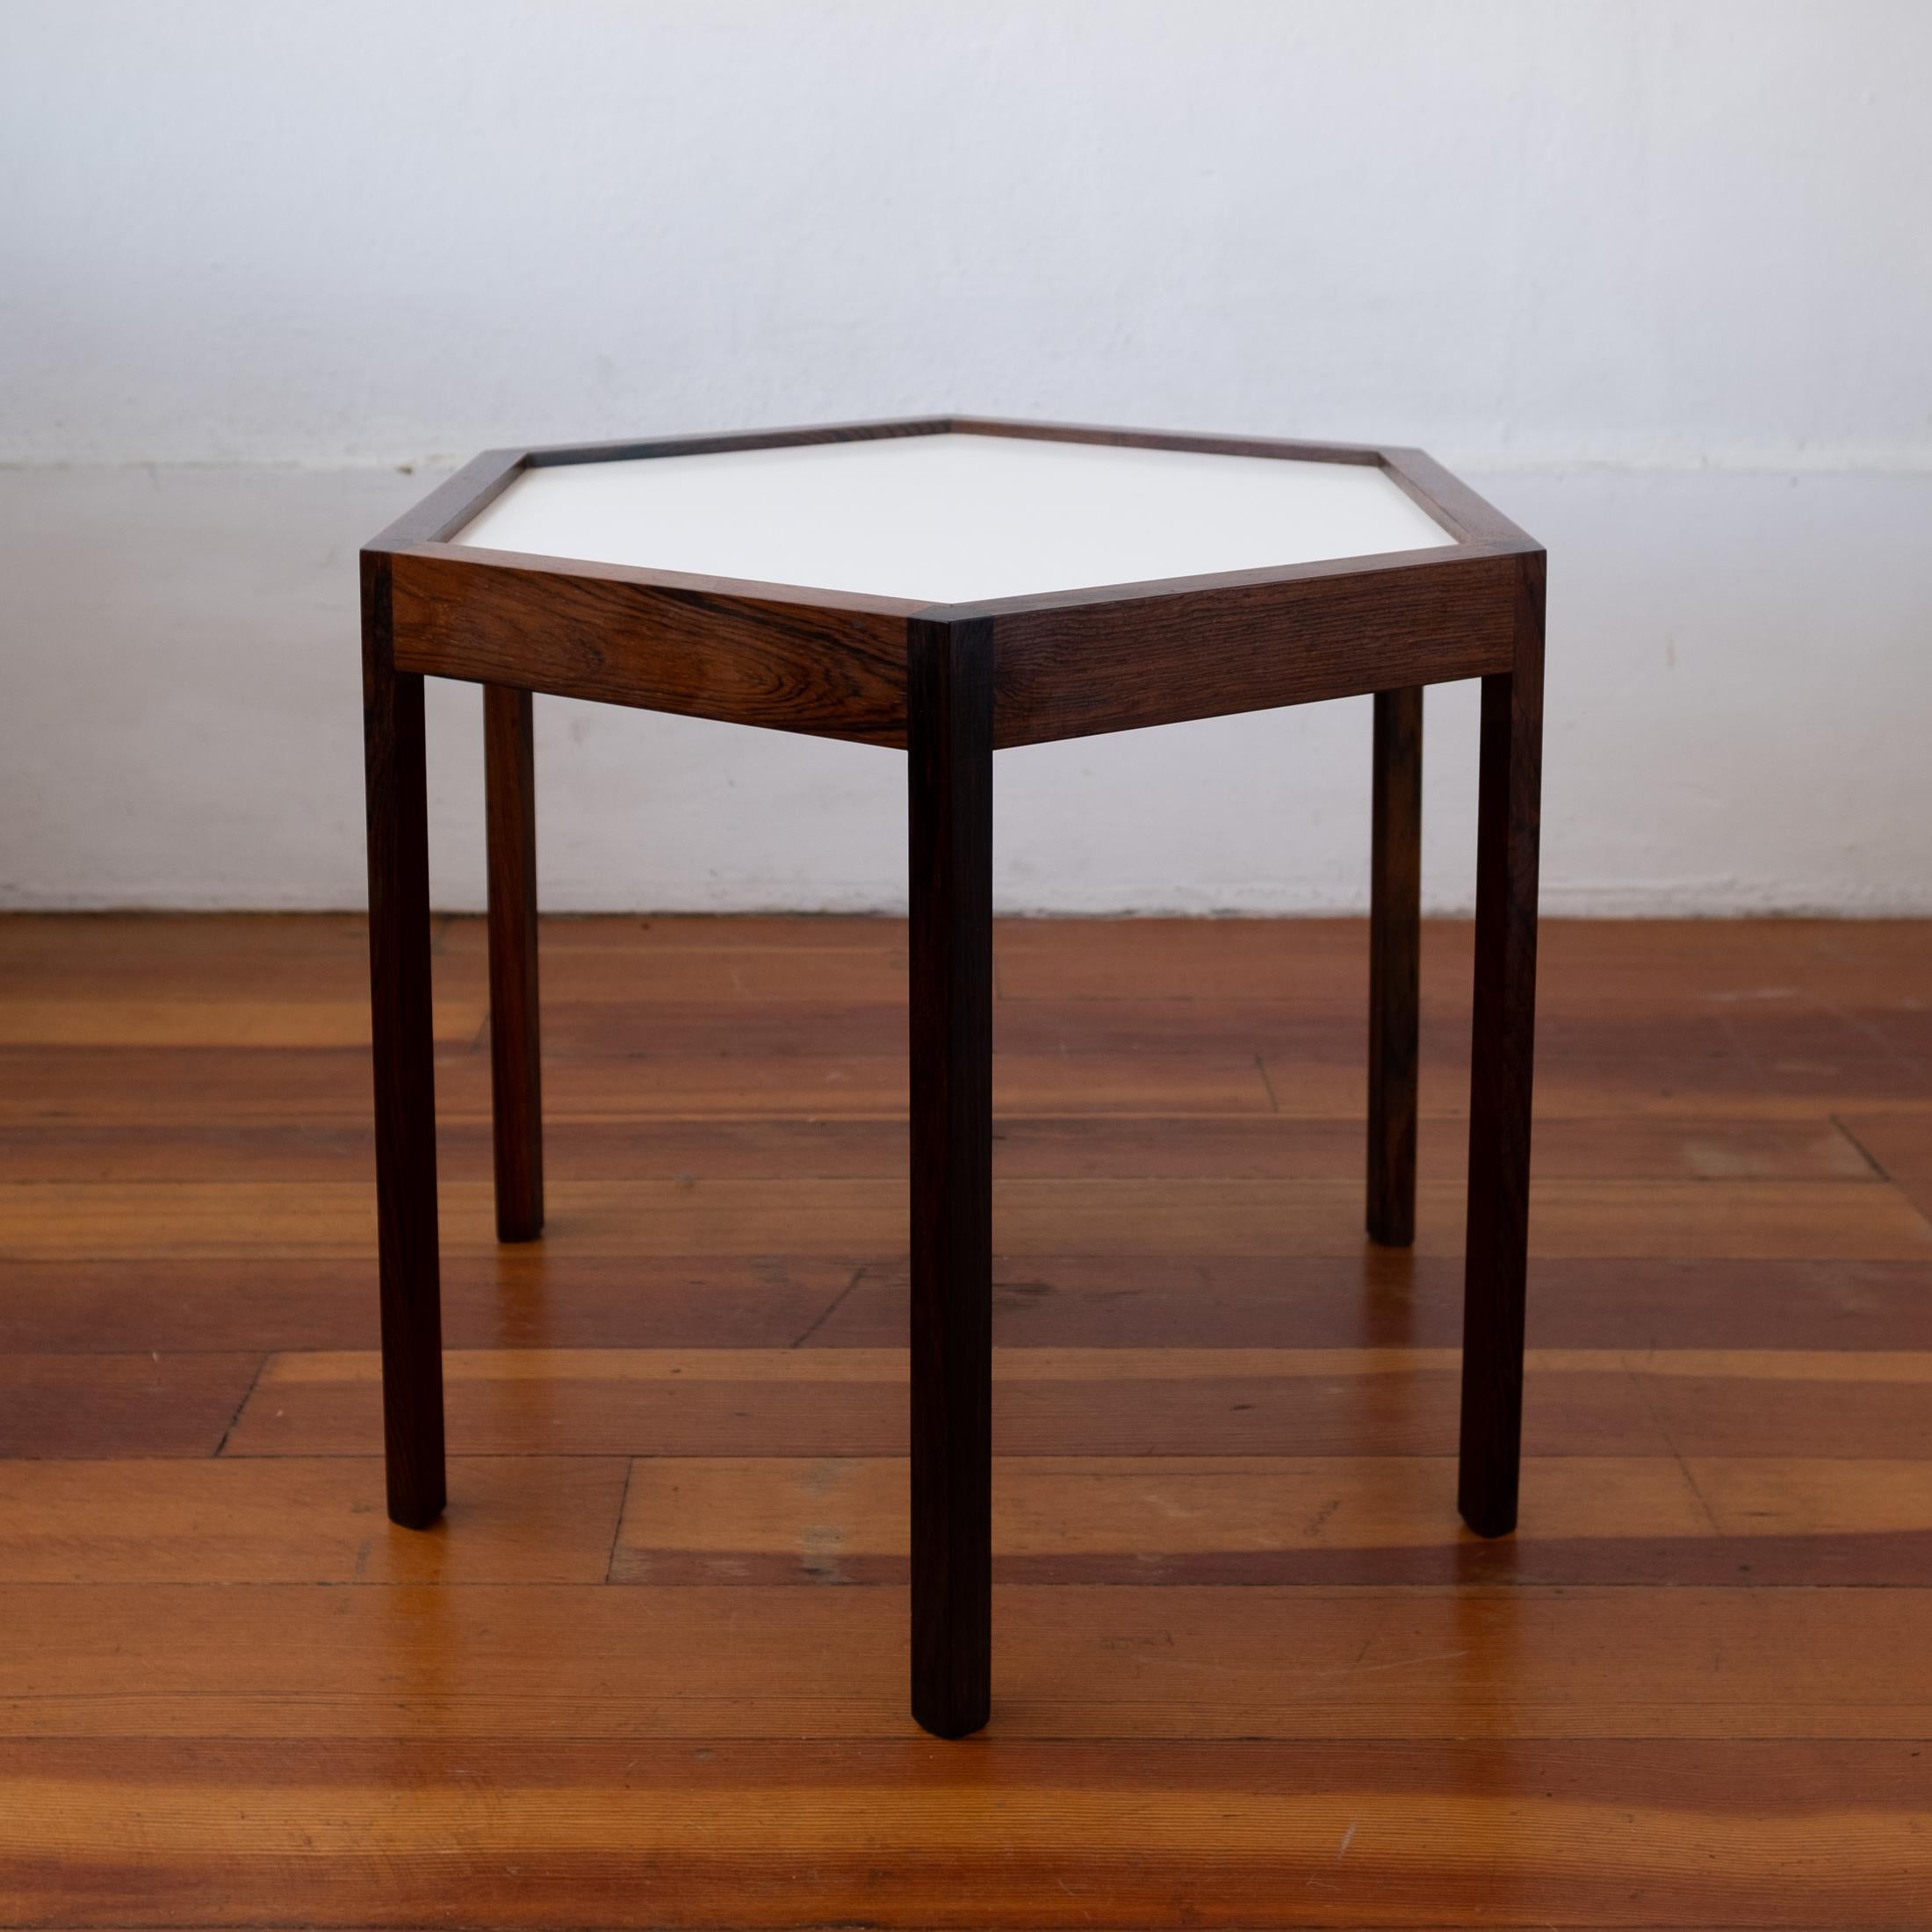 Hexagon rosewood occasional table by Hans C. Andersen. White laminate top. Excellent detailing and craftsmanship. Signed. Denmark, 1960s.